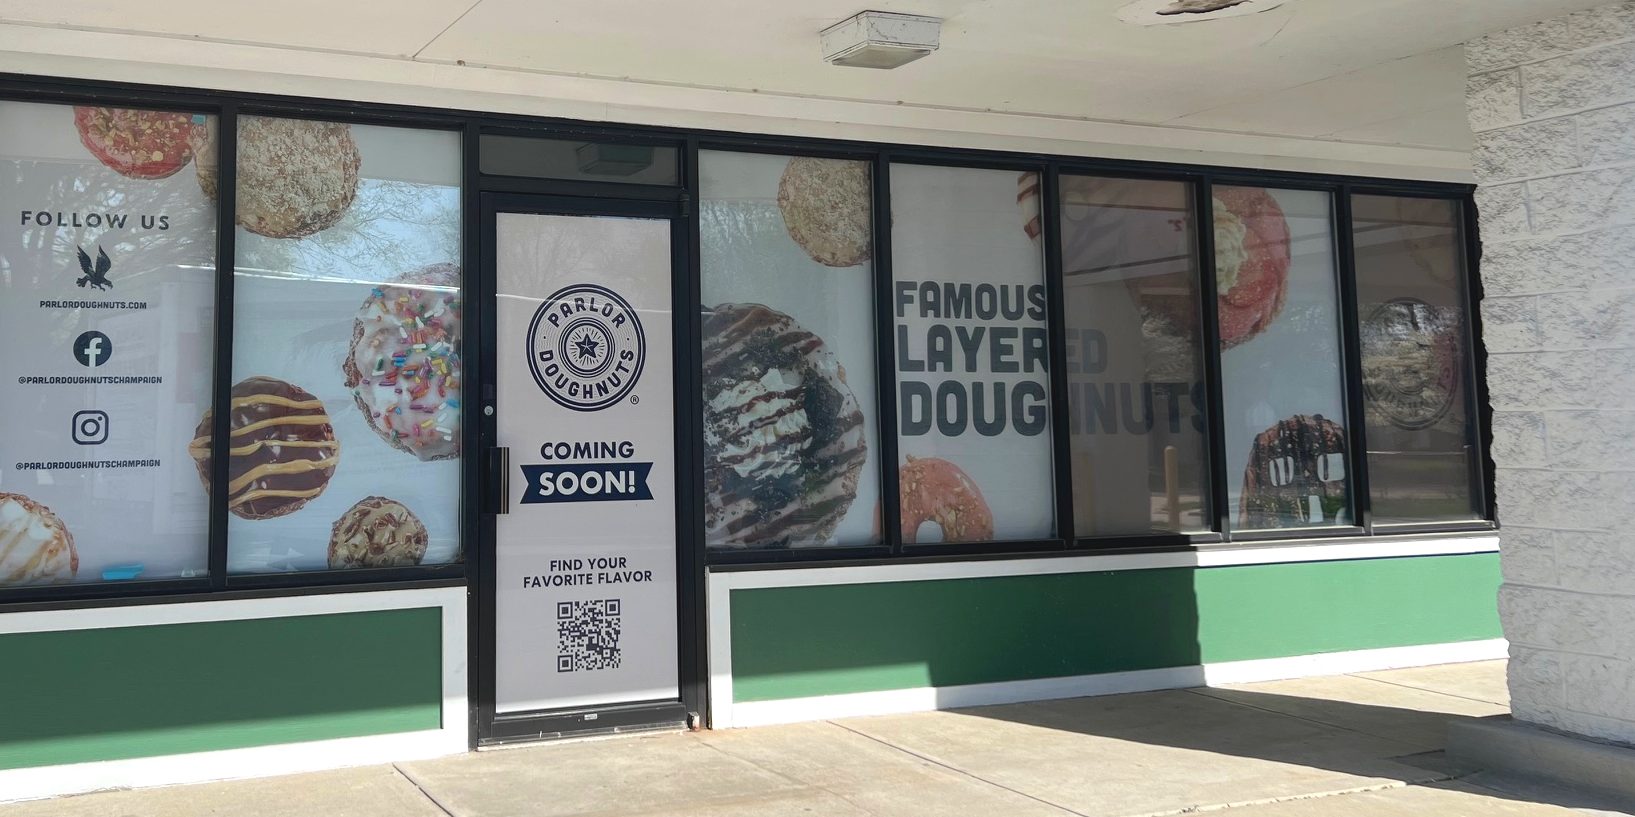 Parlor Doughnuts to open in Champaign